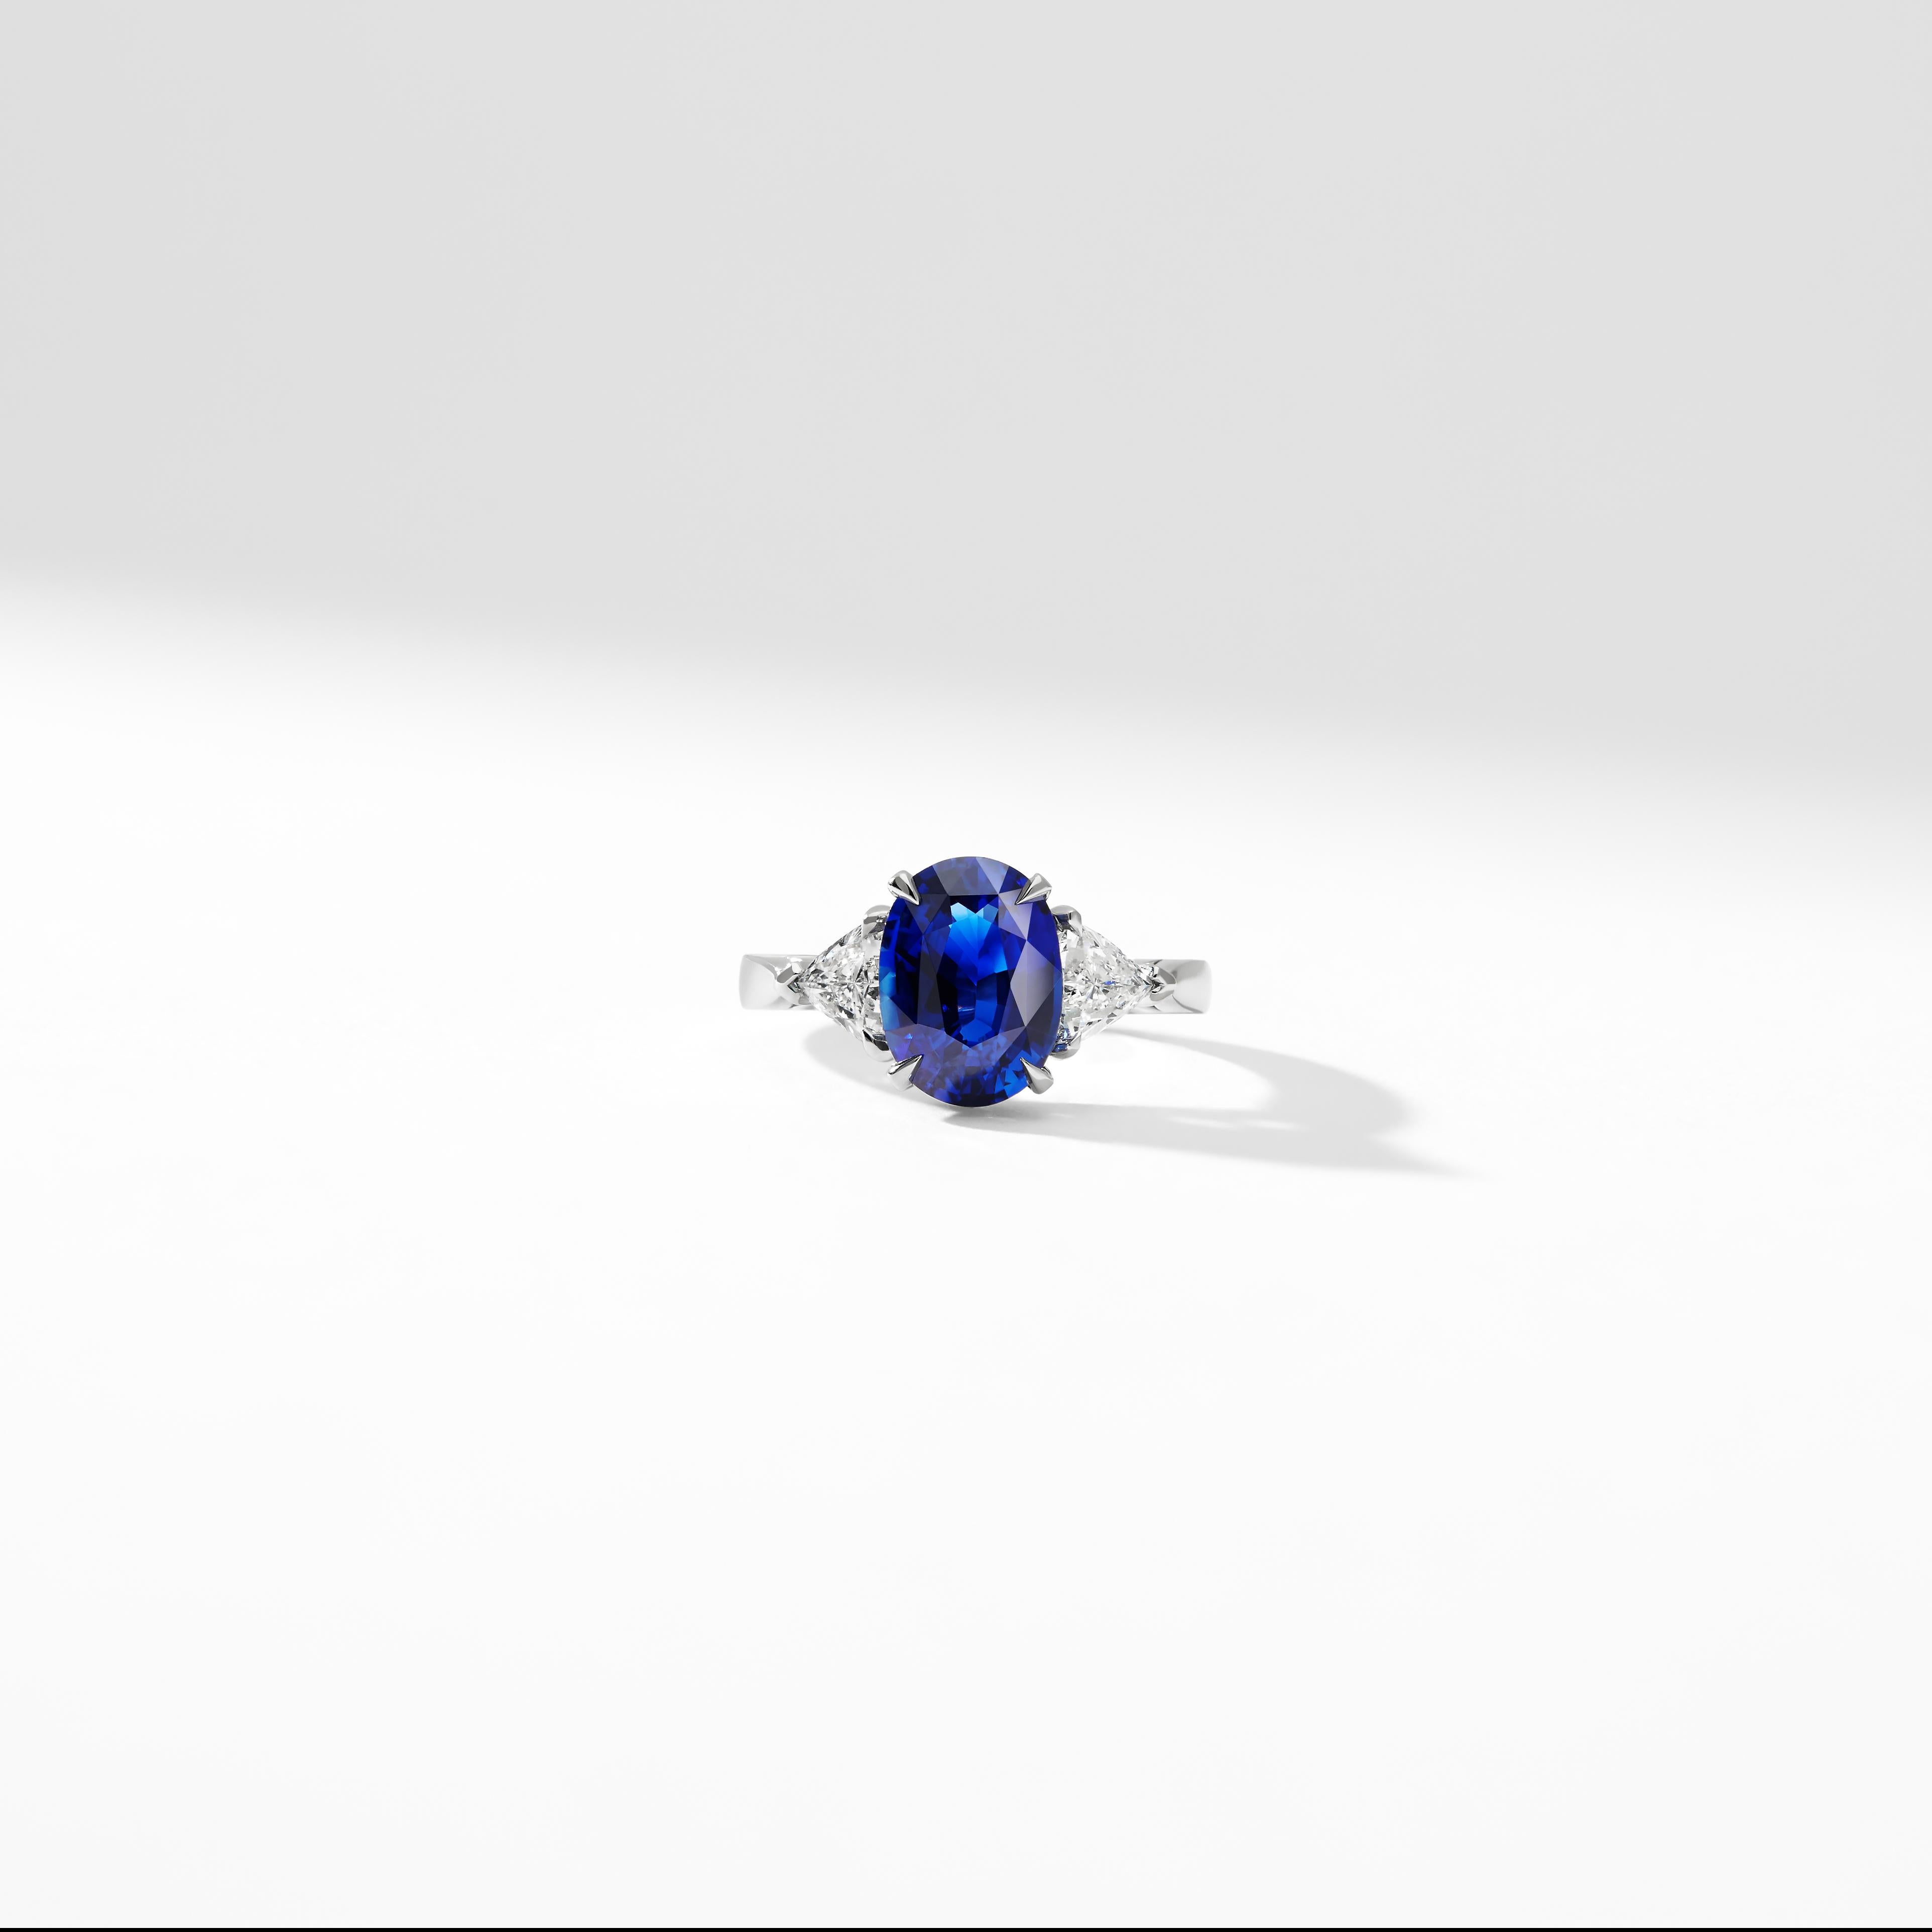 Fabergé Platinum Oval 5.12ct Royal Blue Sapphire Ring Set With White Diamonds For Sale 2